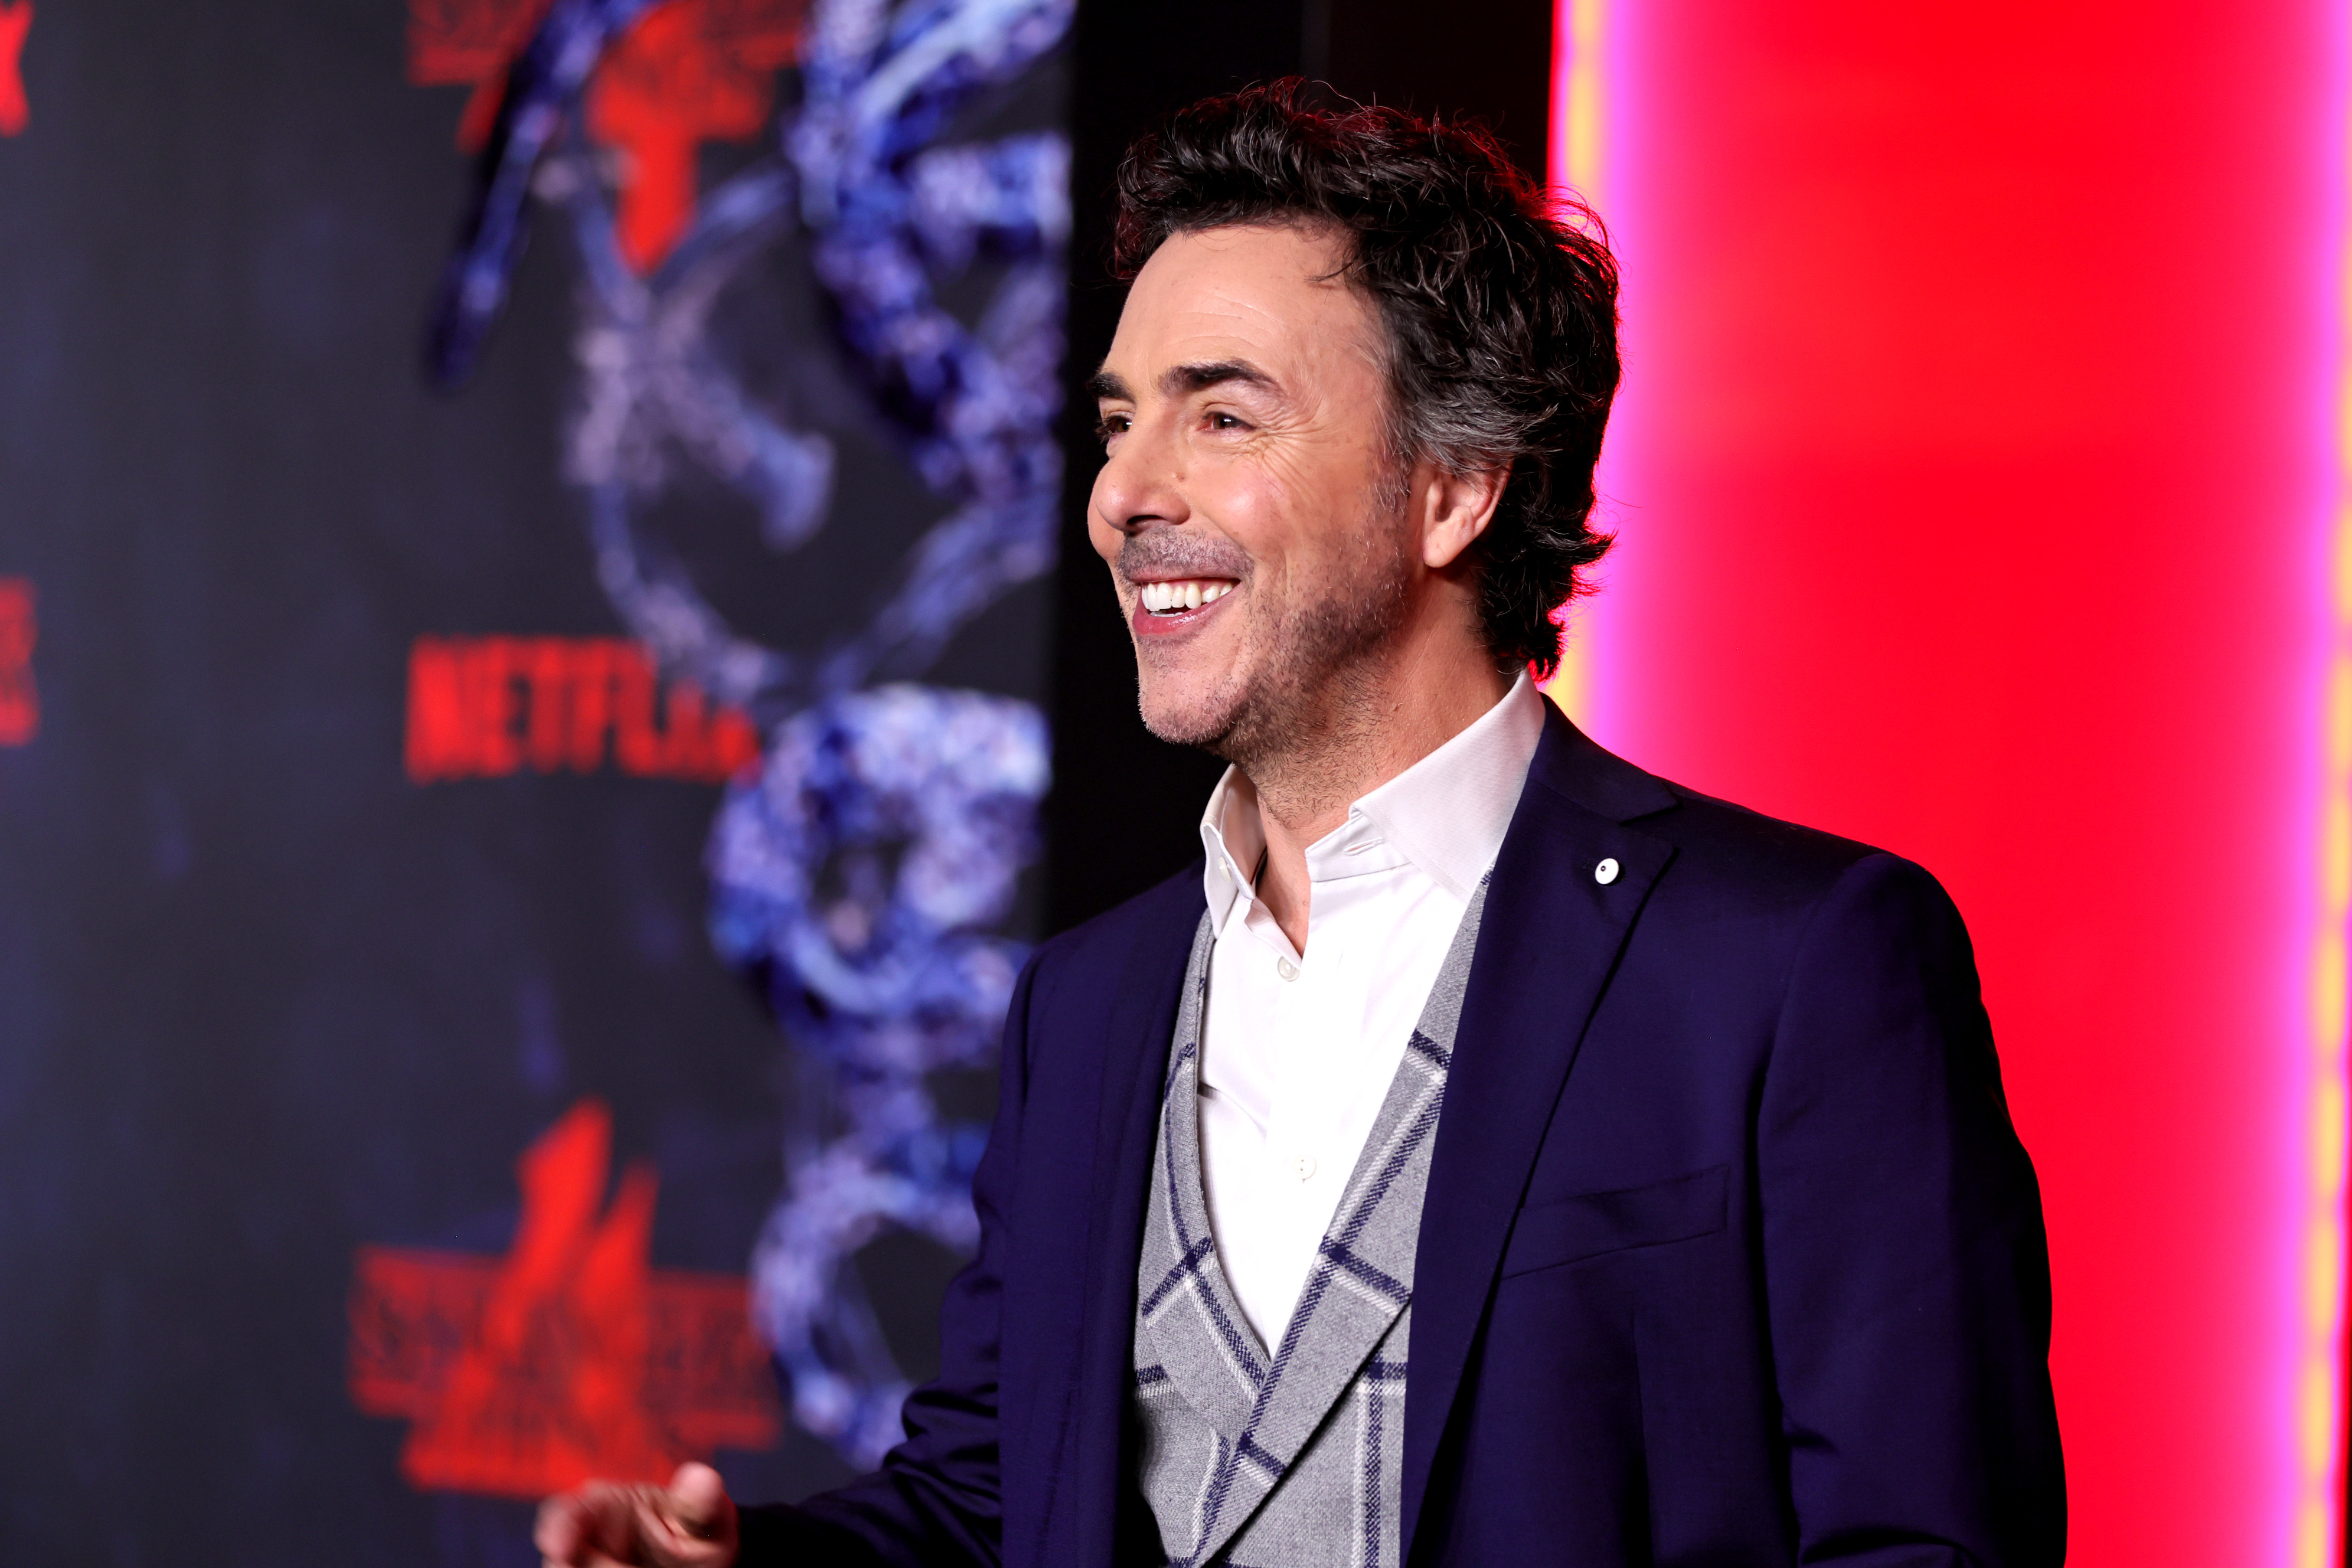 Shawn Levy attends the New York premiere of Stranger Things Season 4 for Netflix